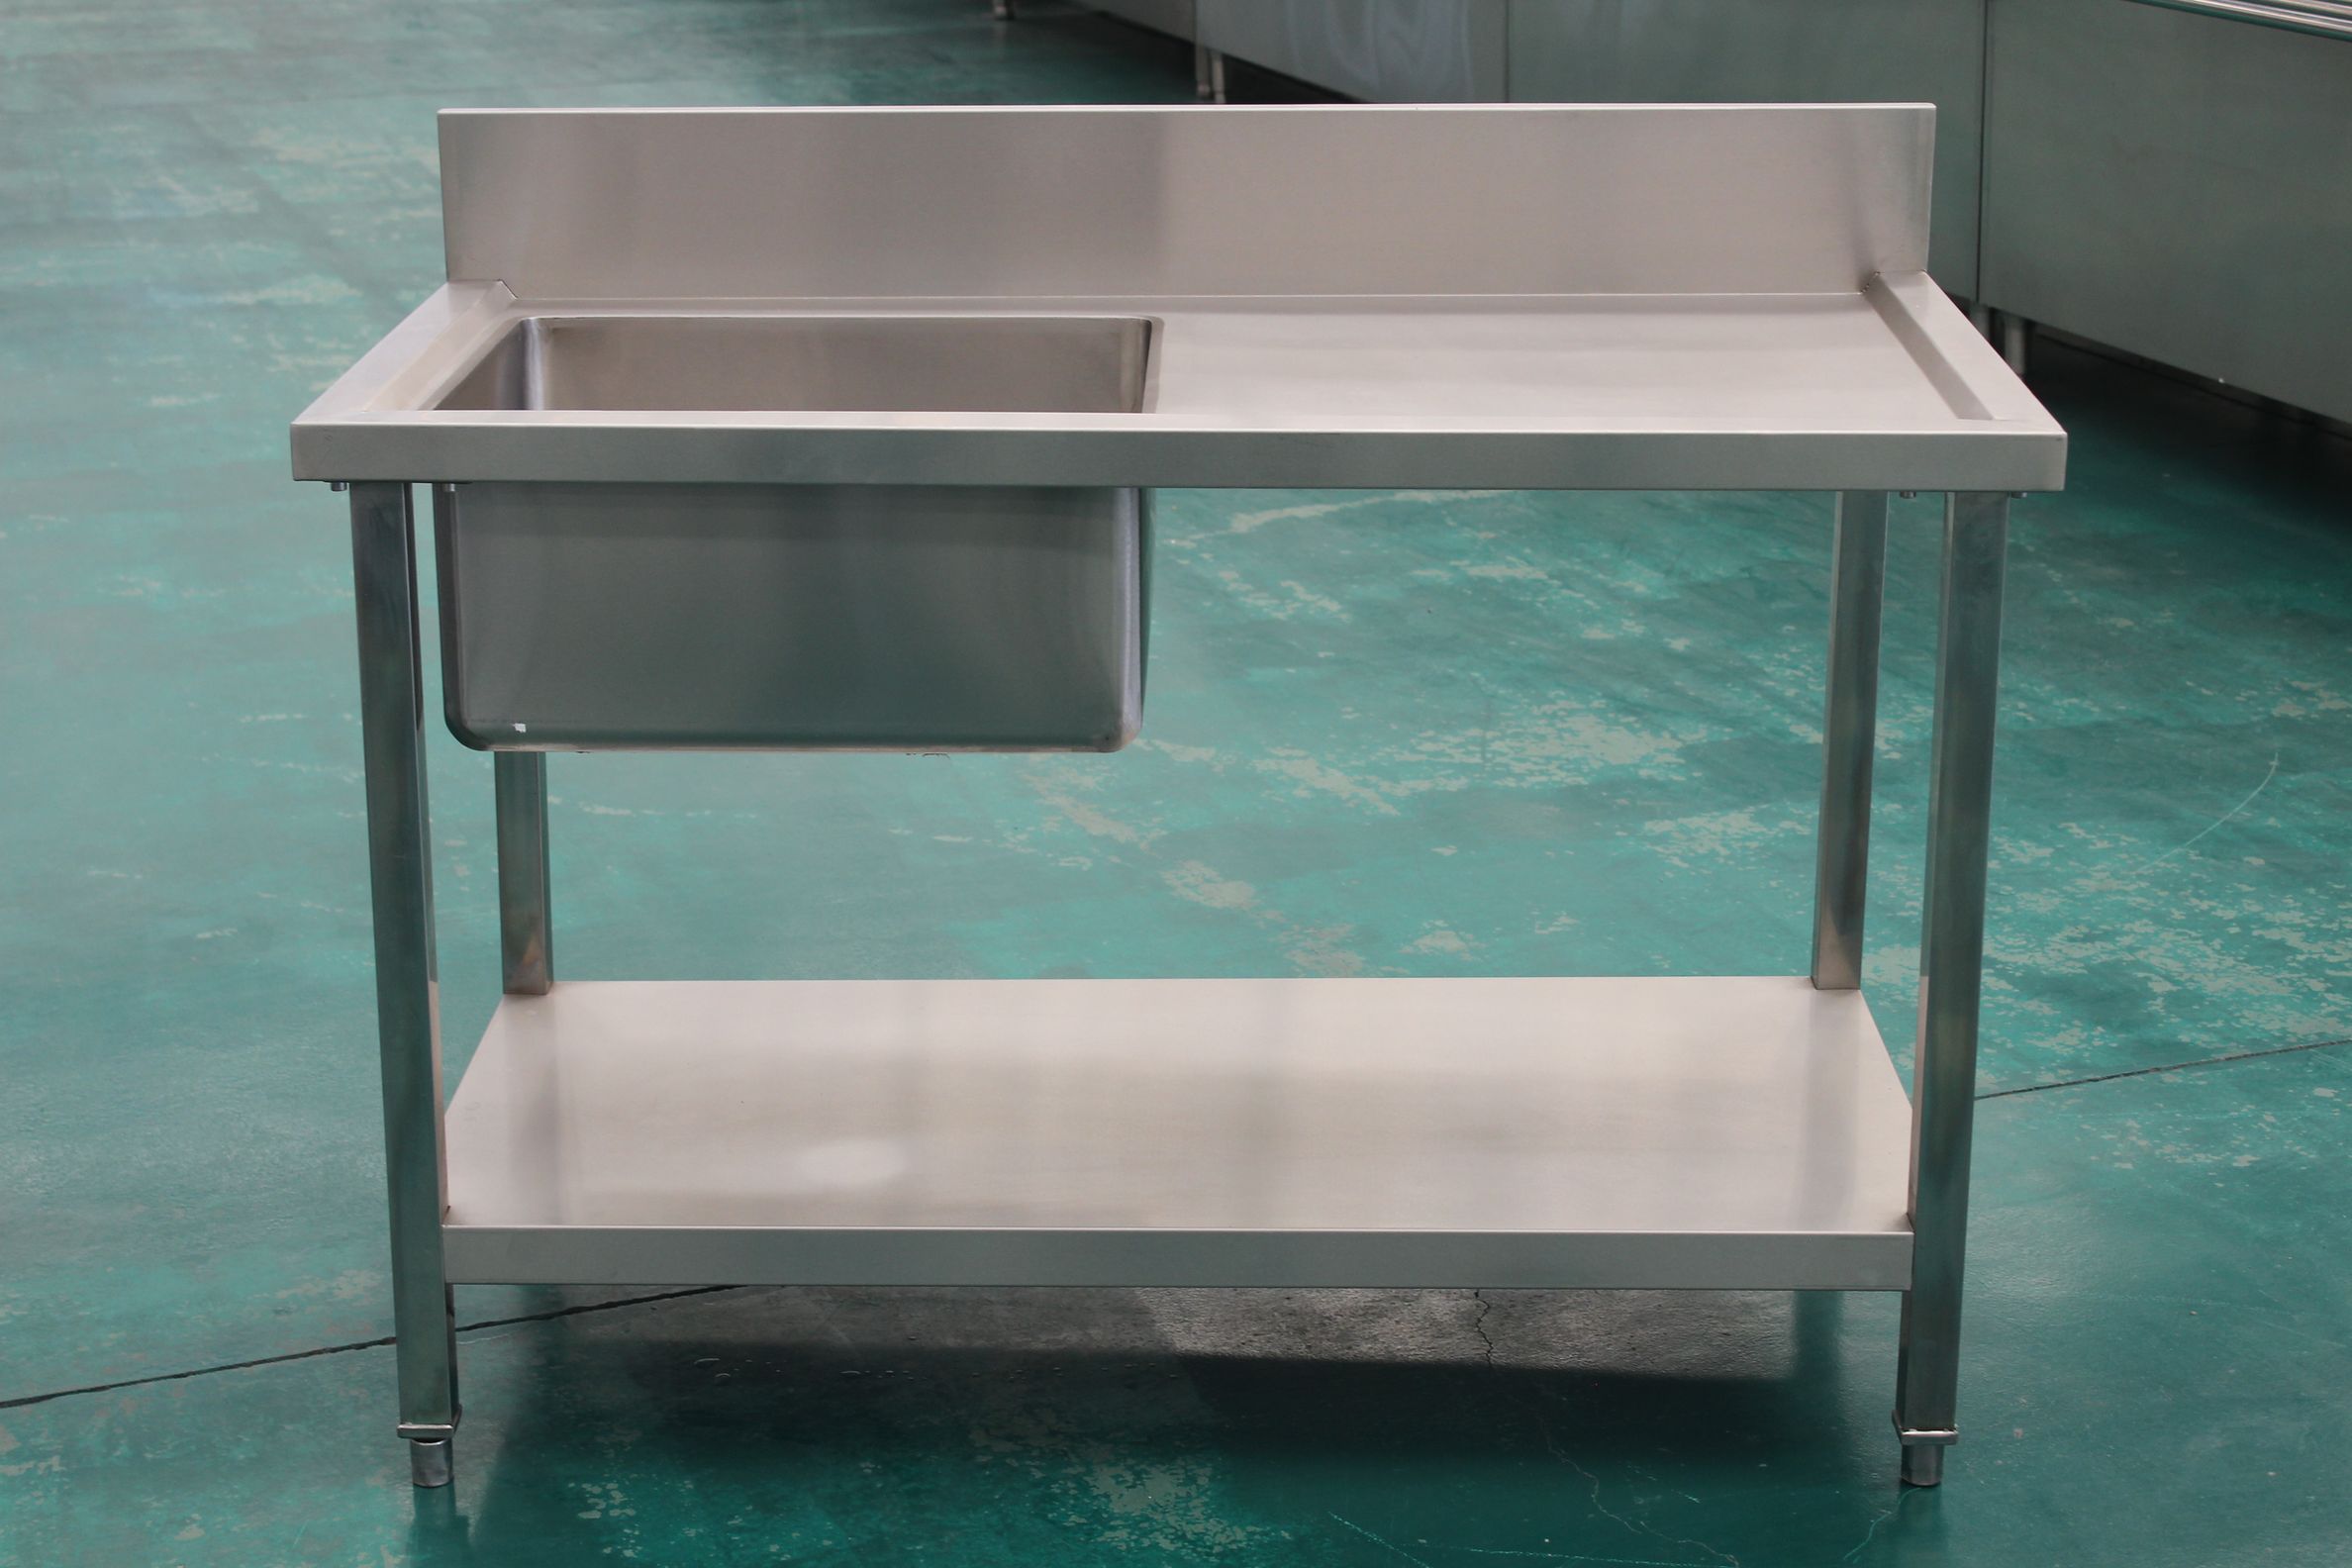 Stainless steel sink with drainboard